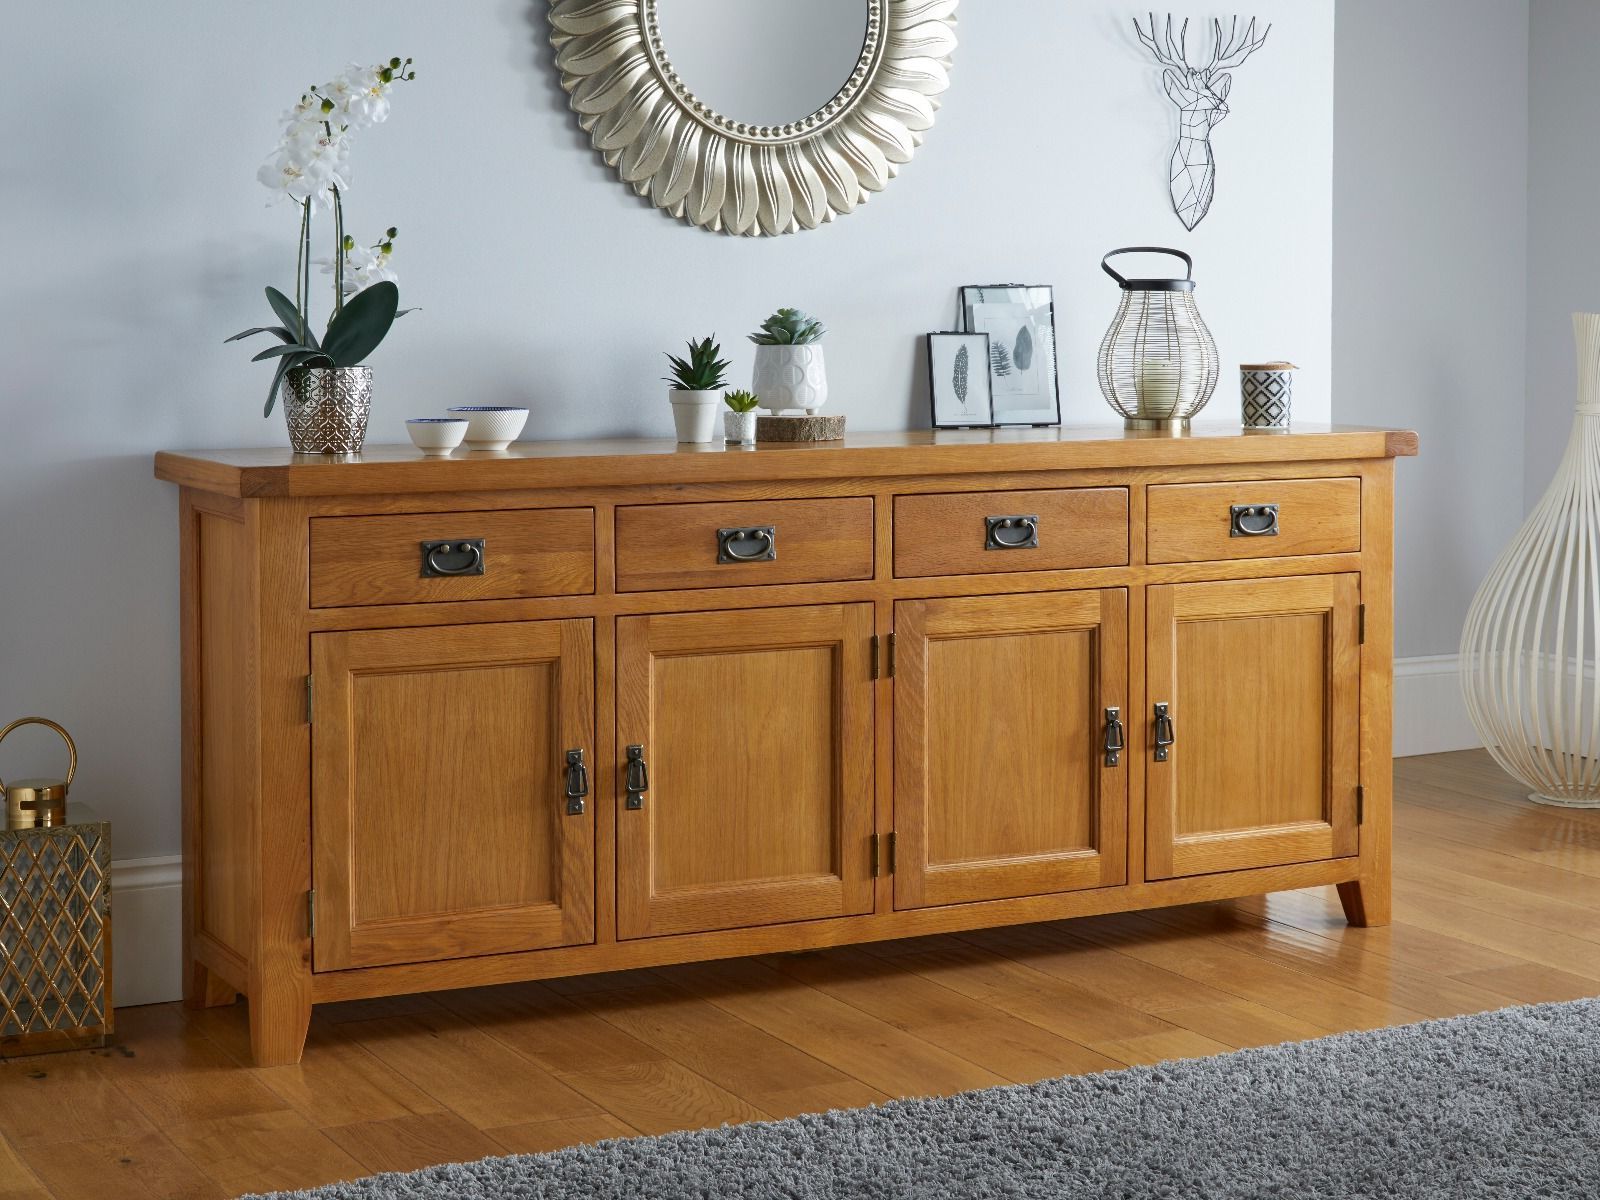 4 Door Sideboards With Regard To Well Liked Large Country Oak Sideboard 200cm – Free Delivery (View 11 of 15)